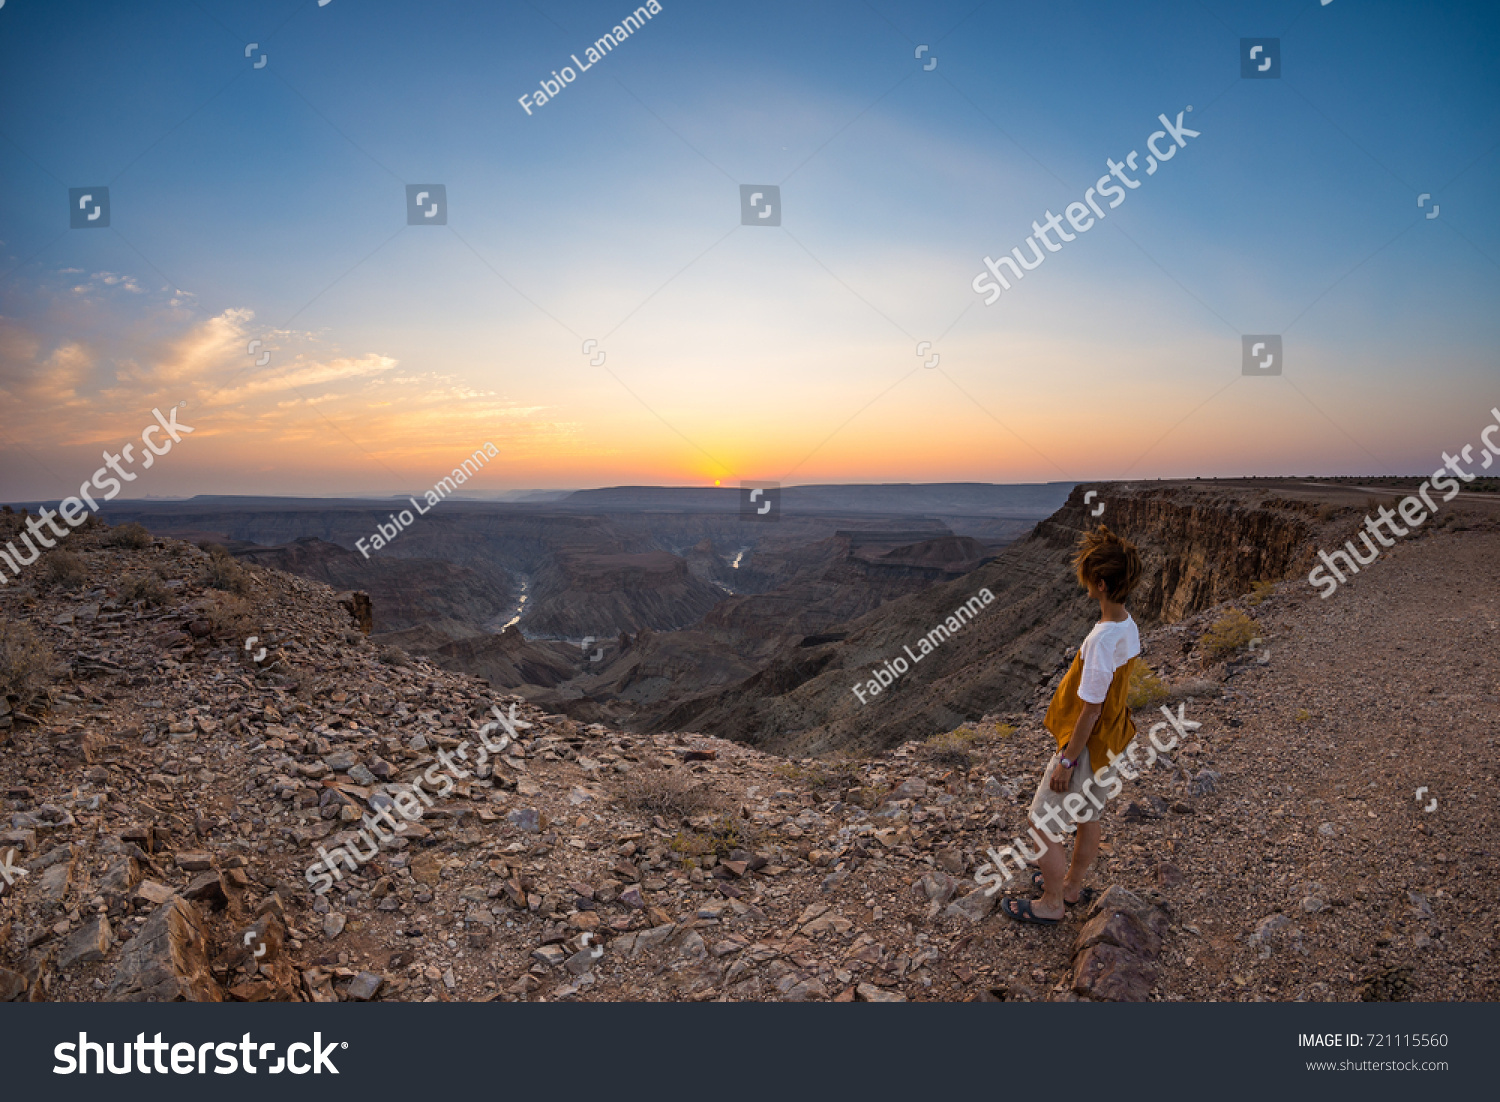 Tourist looking at the Fish River Canyon, scenic travel destination in Southern Namibia. Ultra wide angle view from above, colorful scenic sunset. #721115560